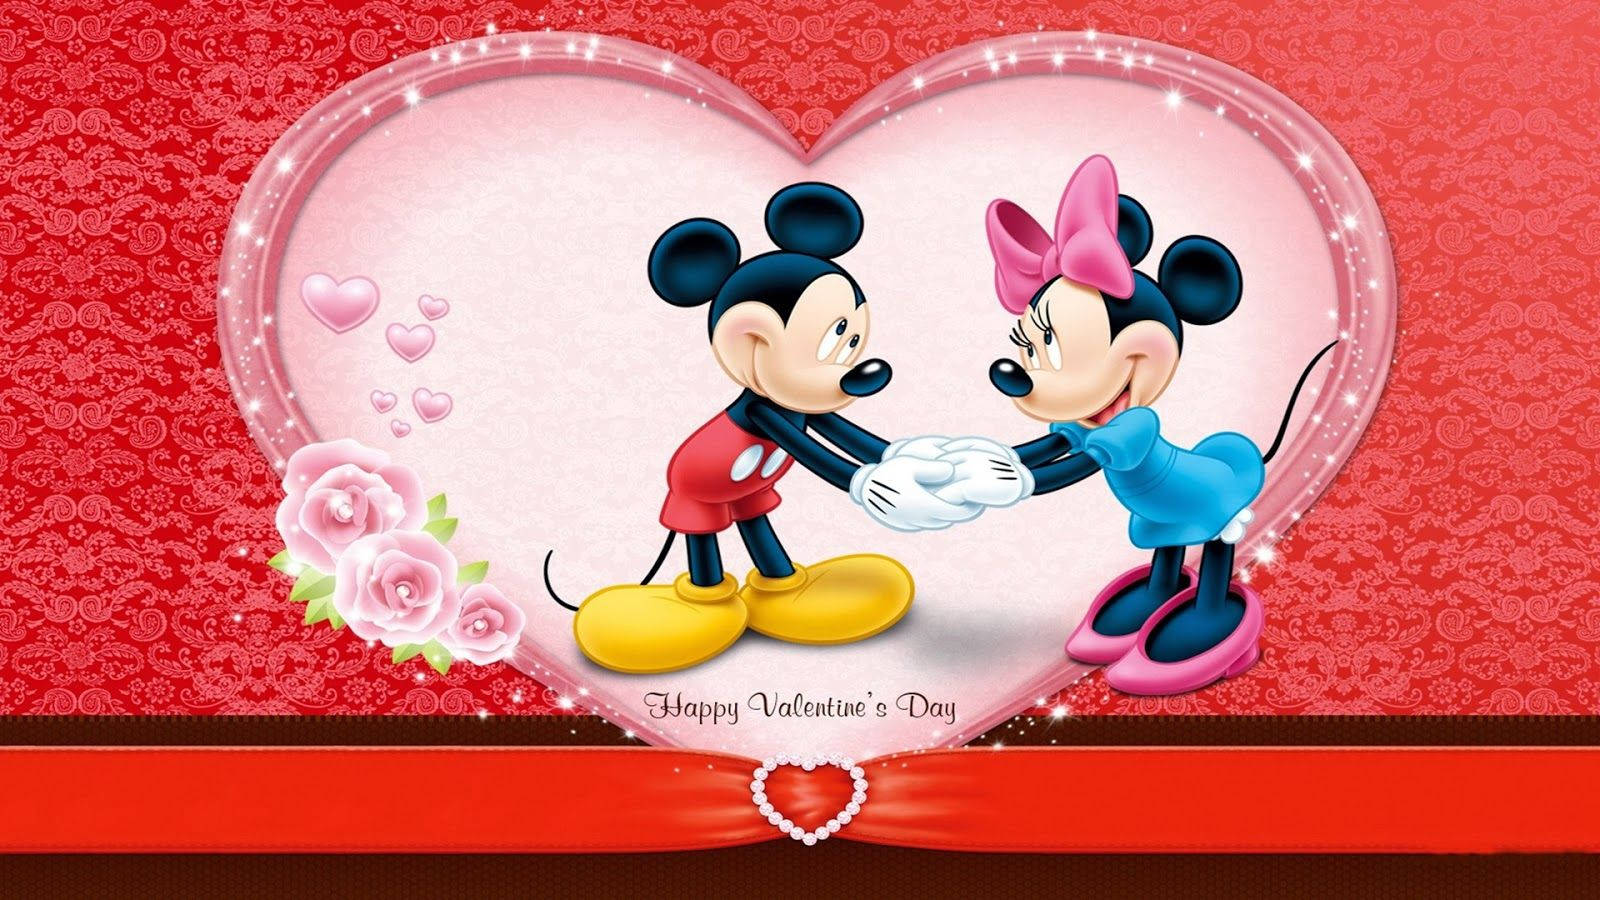 Cute Valentine's Day Mickey Mouse Wallpaper